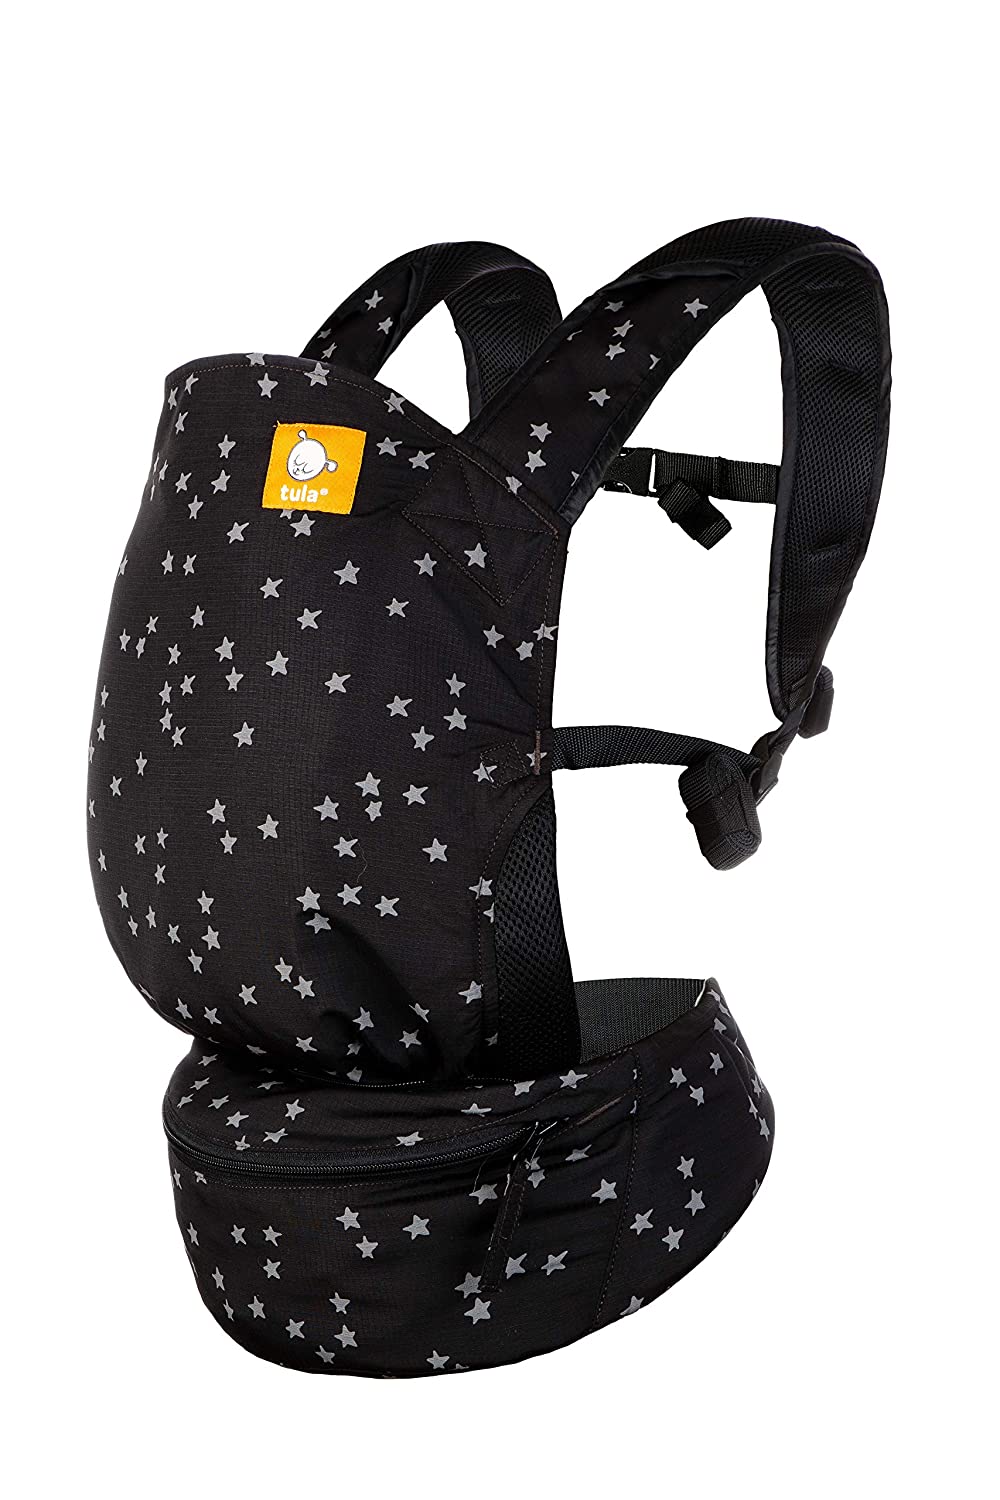 Tula Lite Baby Carrier and Baby Carrier Bag in One, Lightweight, Compact, Ergonomic, Belly Carrier, Back Carrier, Travel Baby Carrier (Discover)